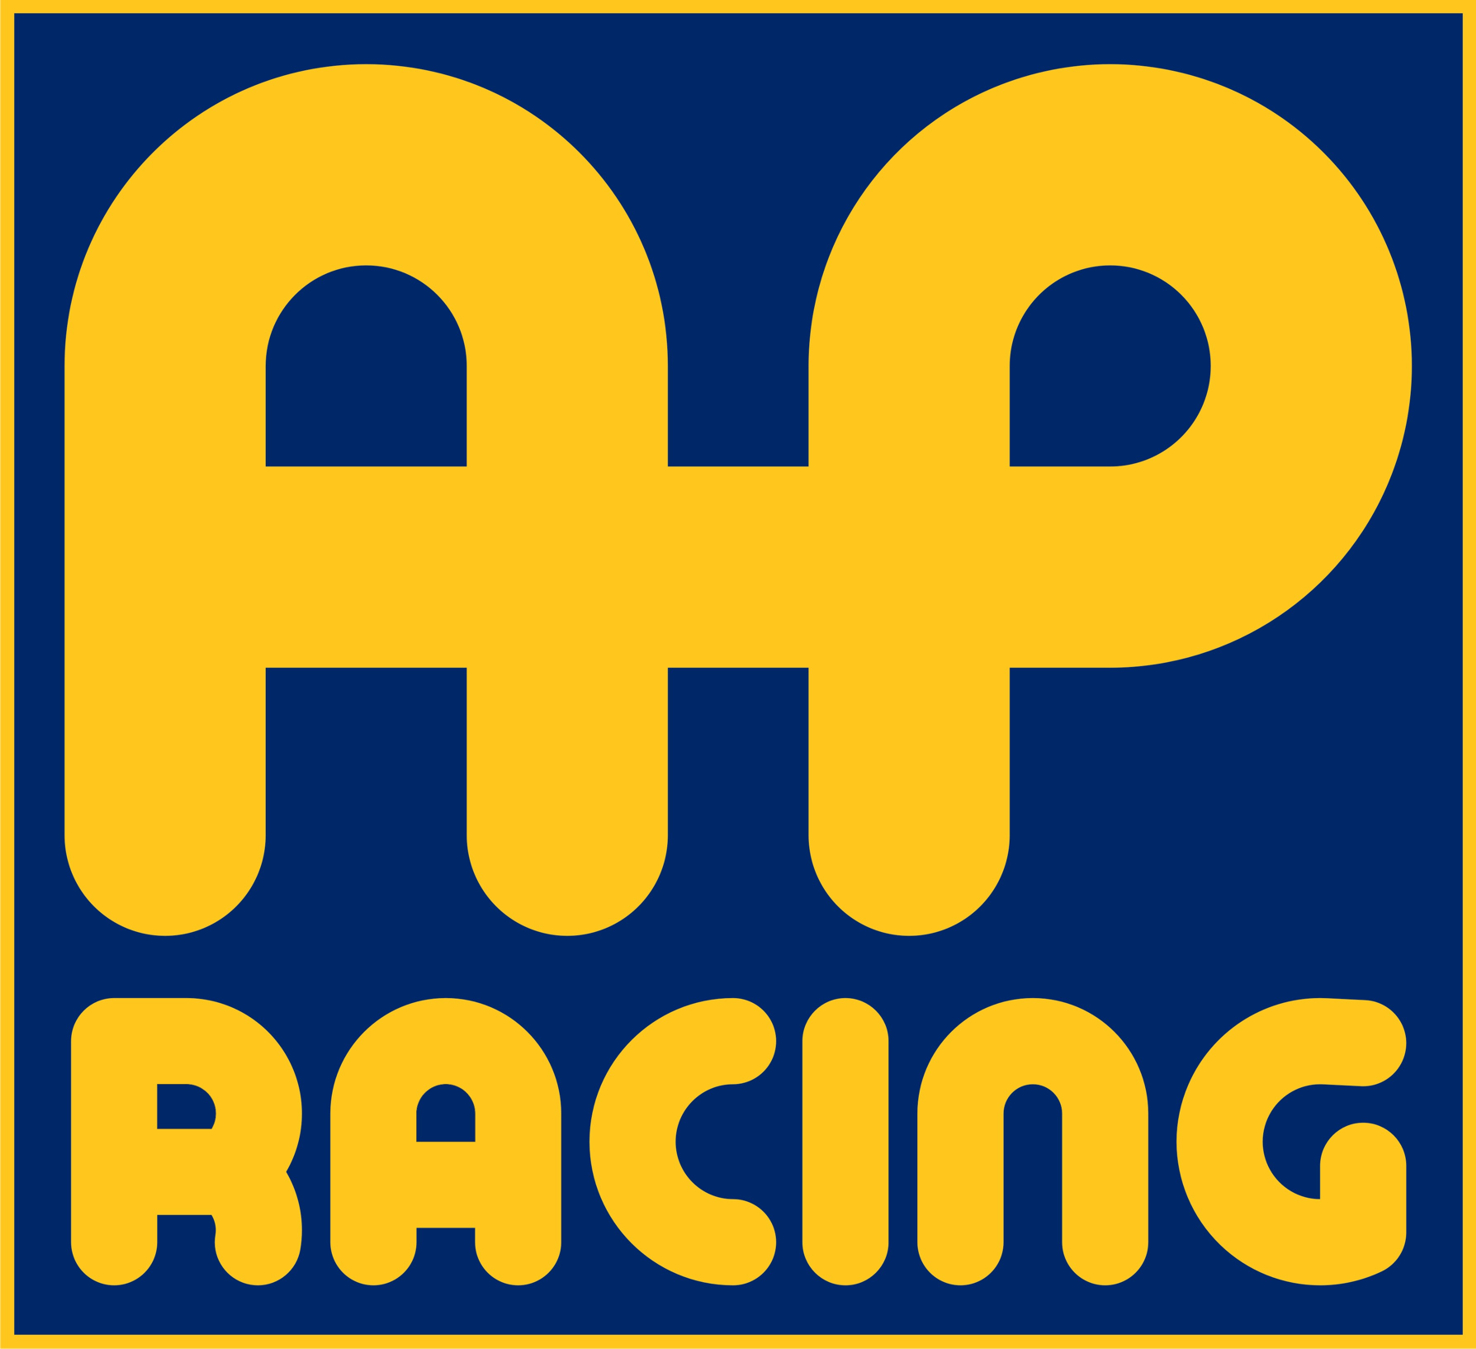 AP Racing is opening new US office - Featured Image